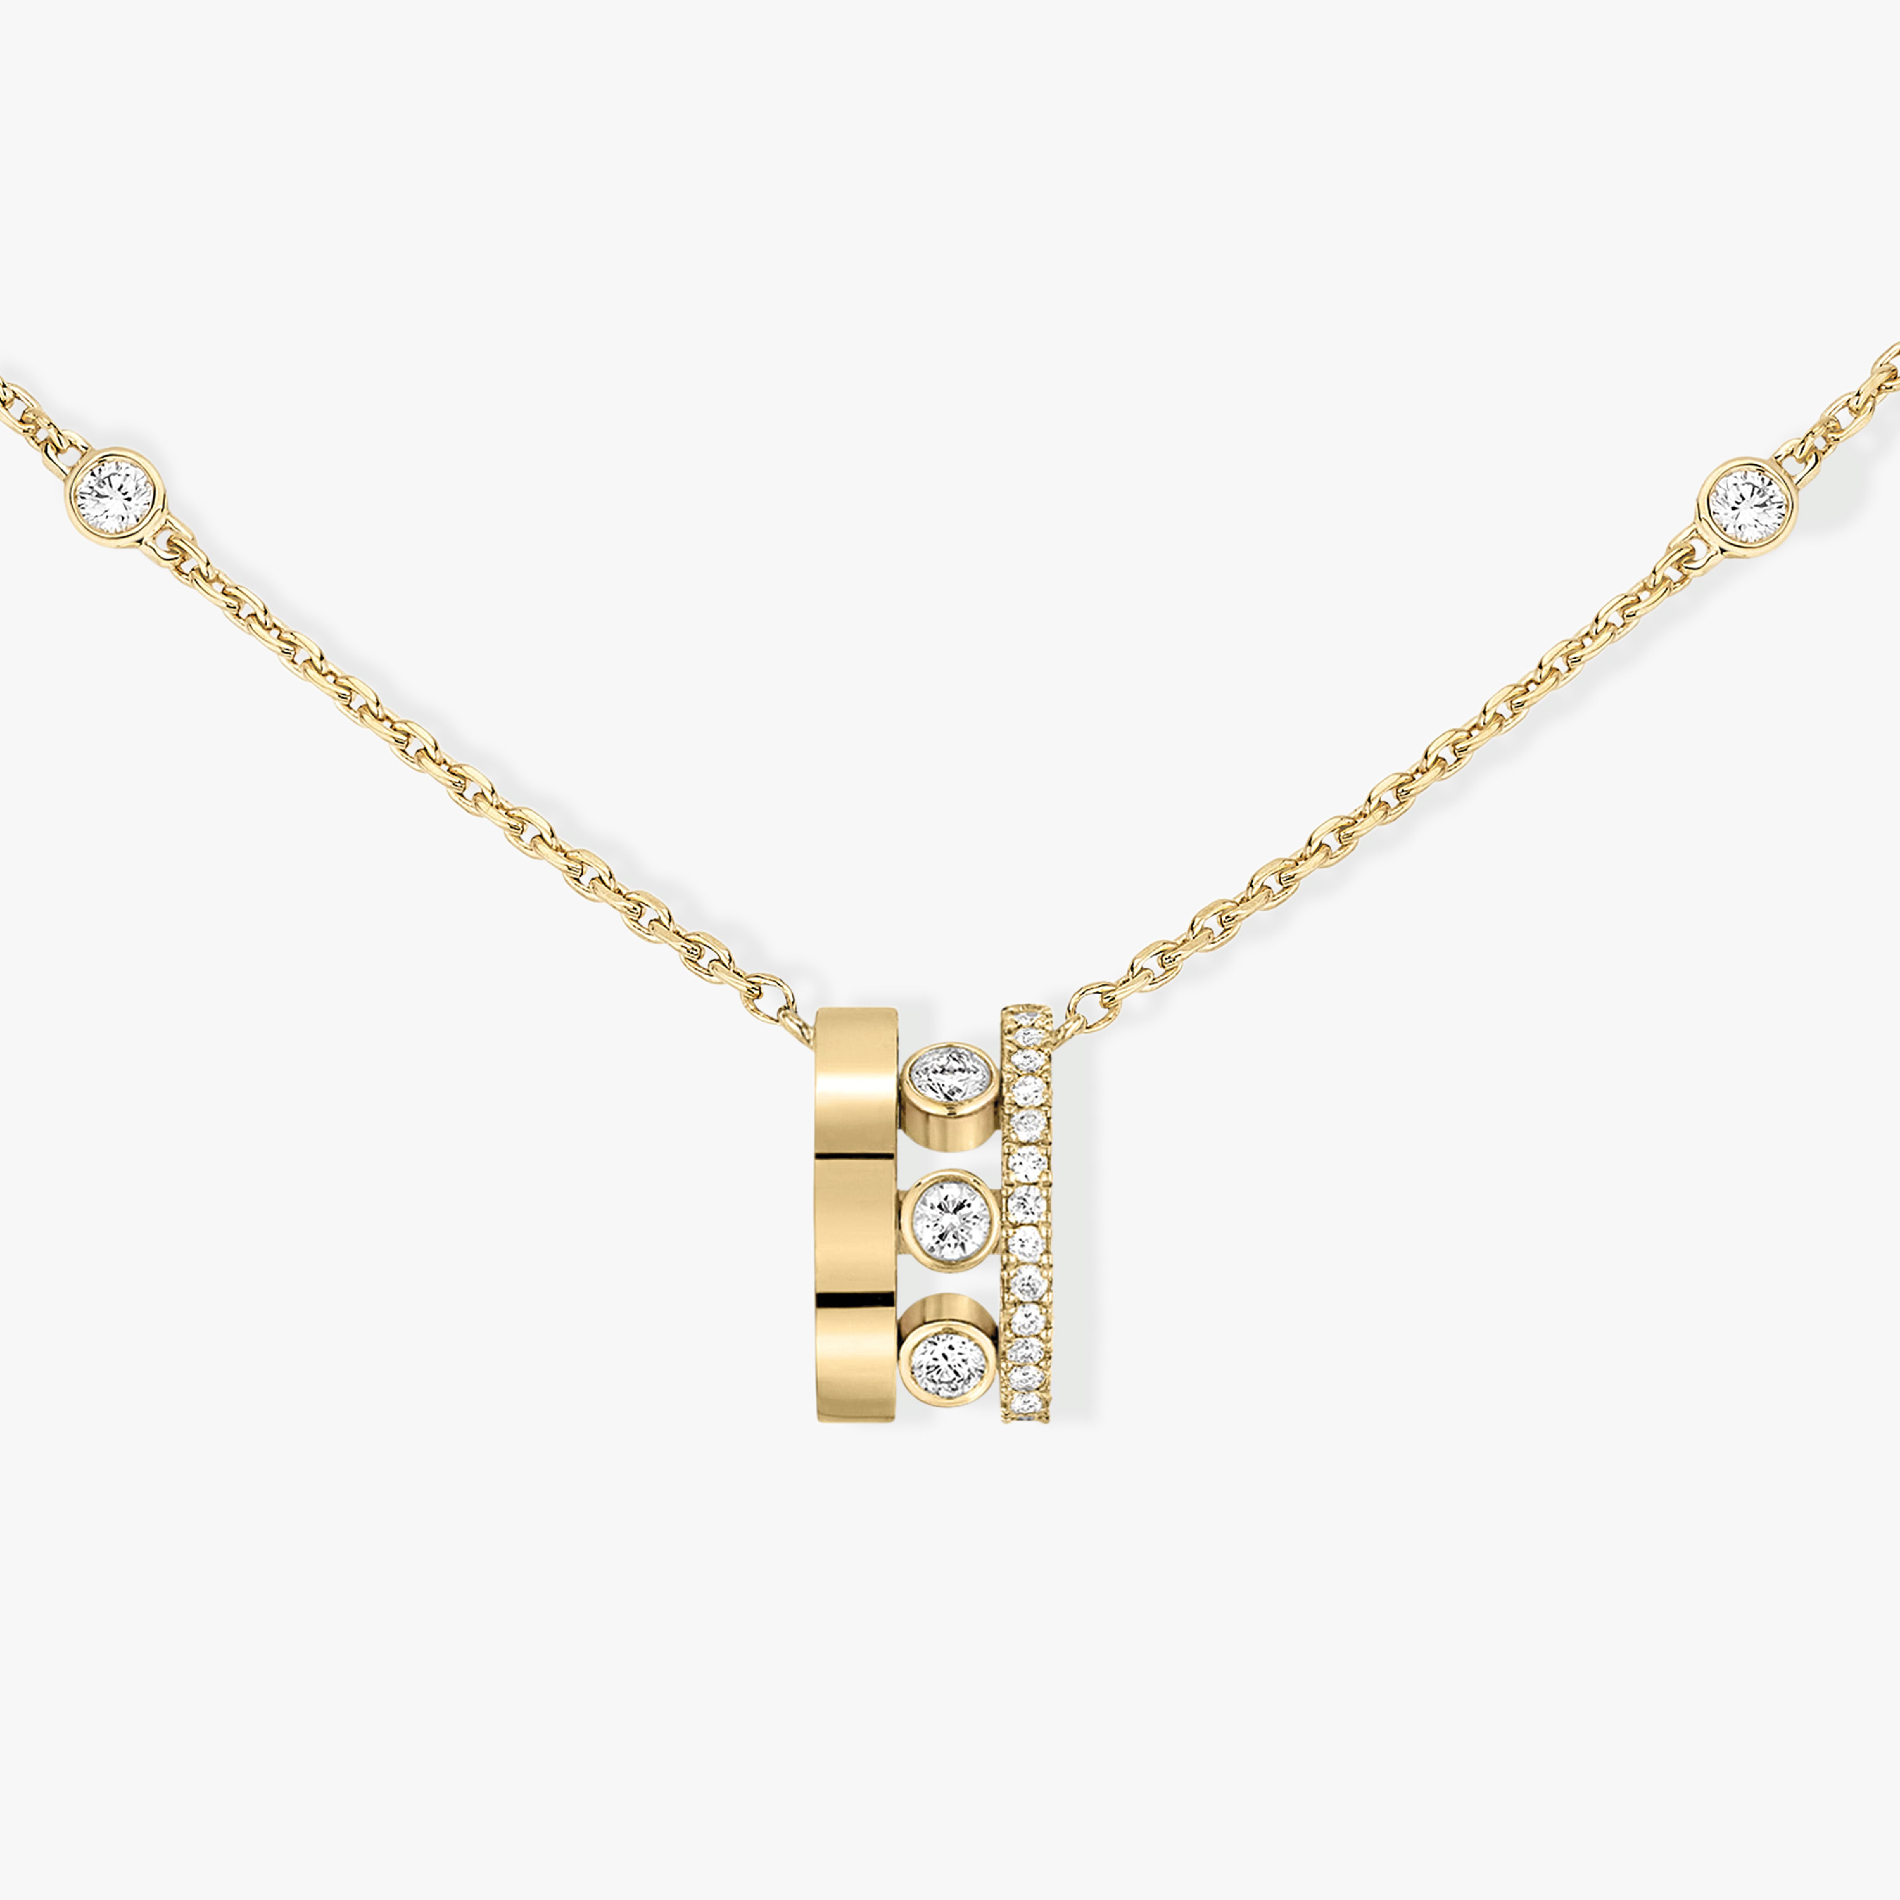 Move Romane Pendant  Yellow Gold For Her Diamond Necklace 07158-YG